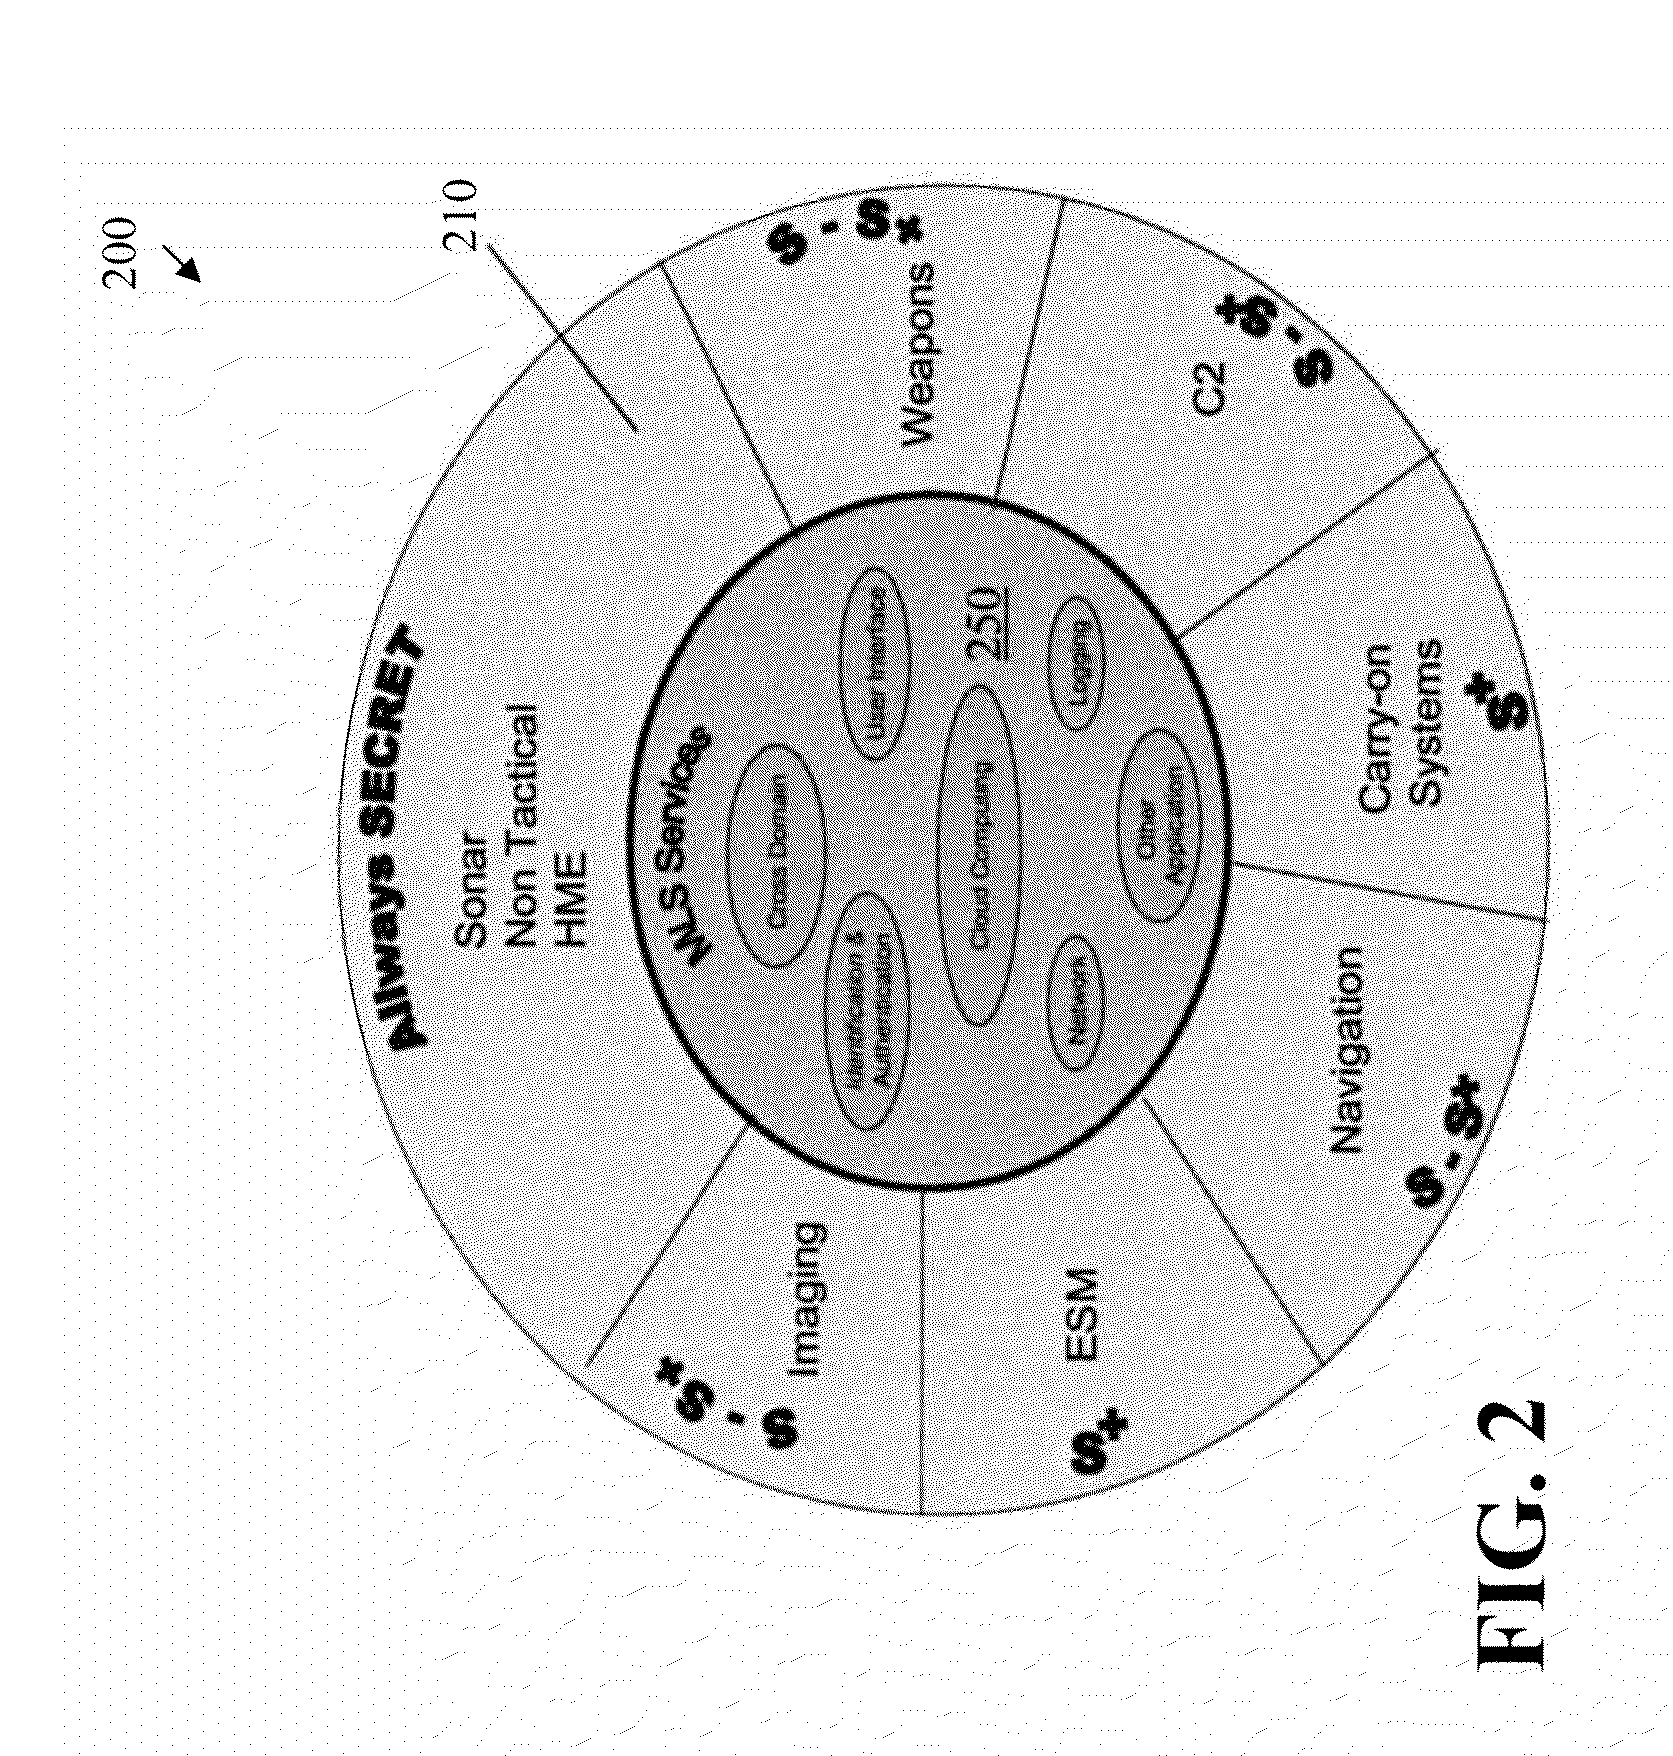 Methods and apparatus for information assurance in a multiple level security (MLS) combat system